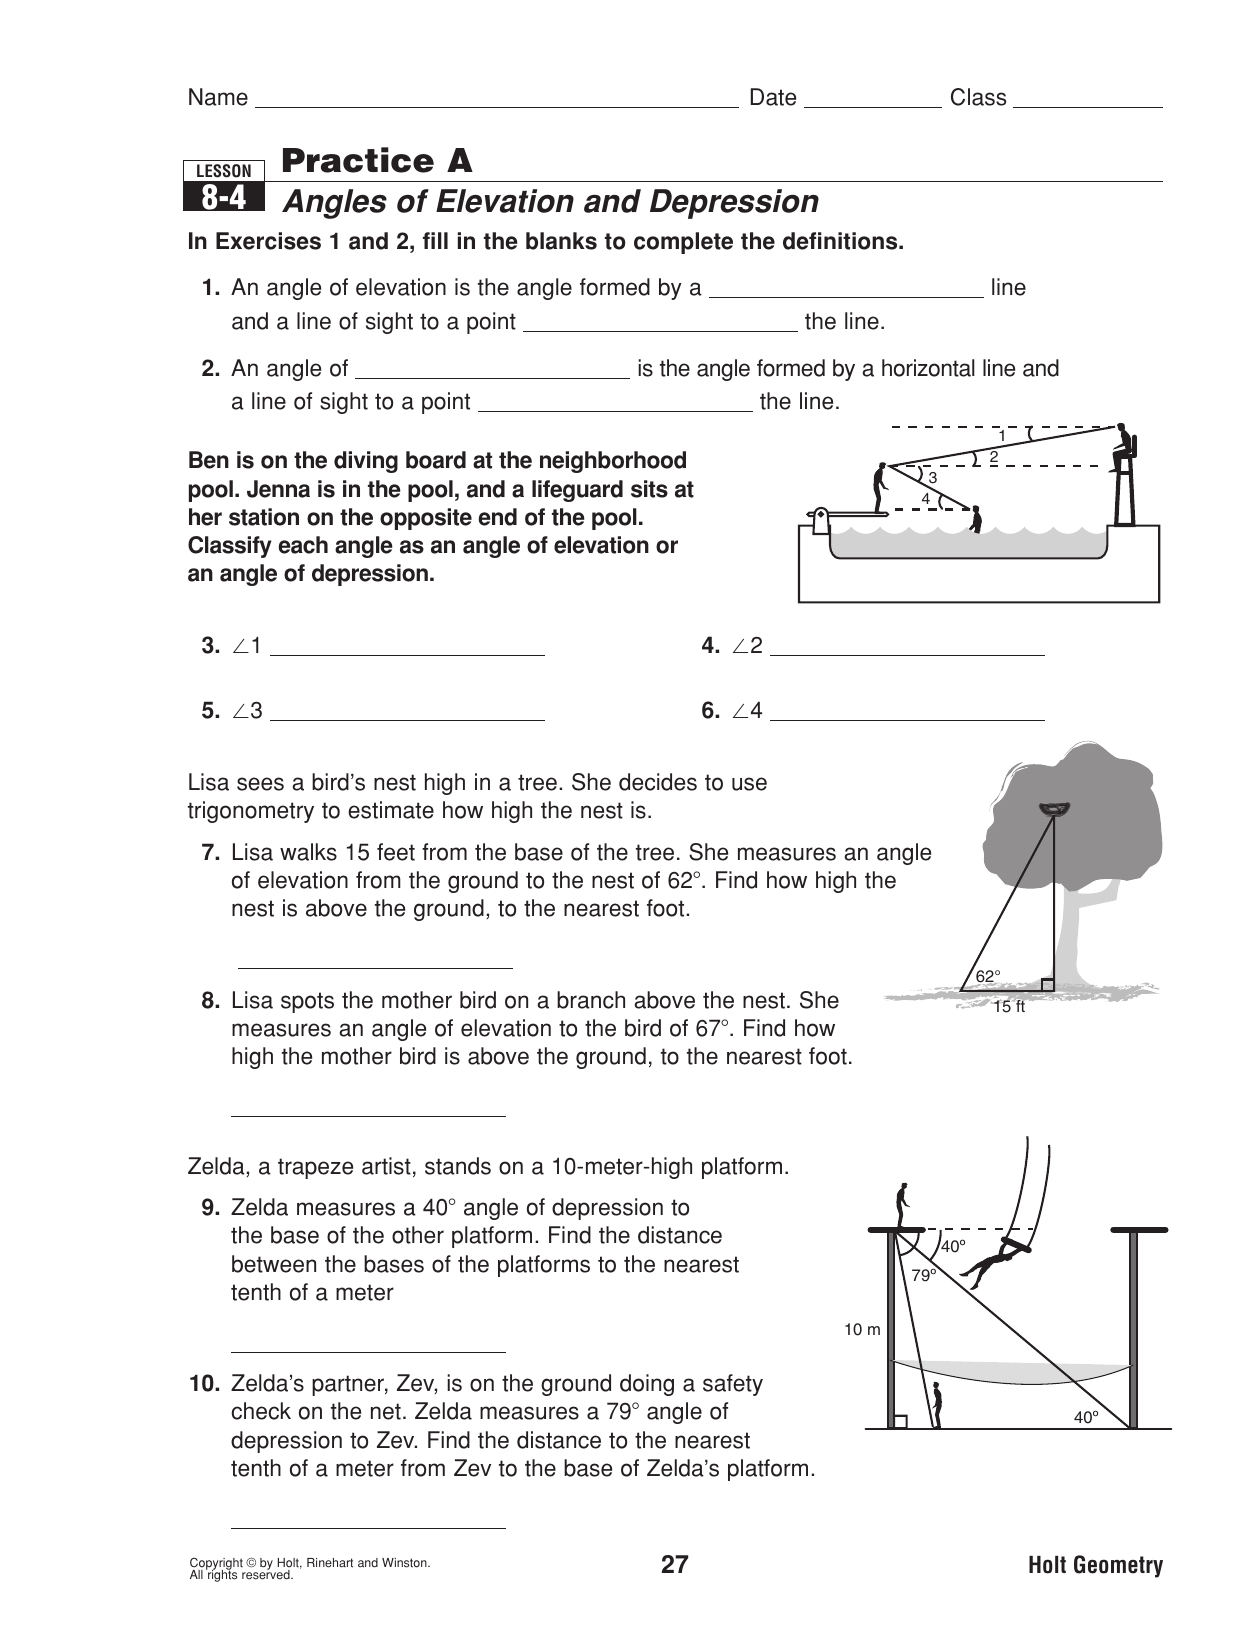 angles-of-depression-and-elevation-worksheet-answers-db-excel